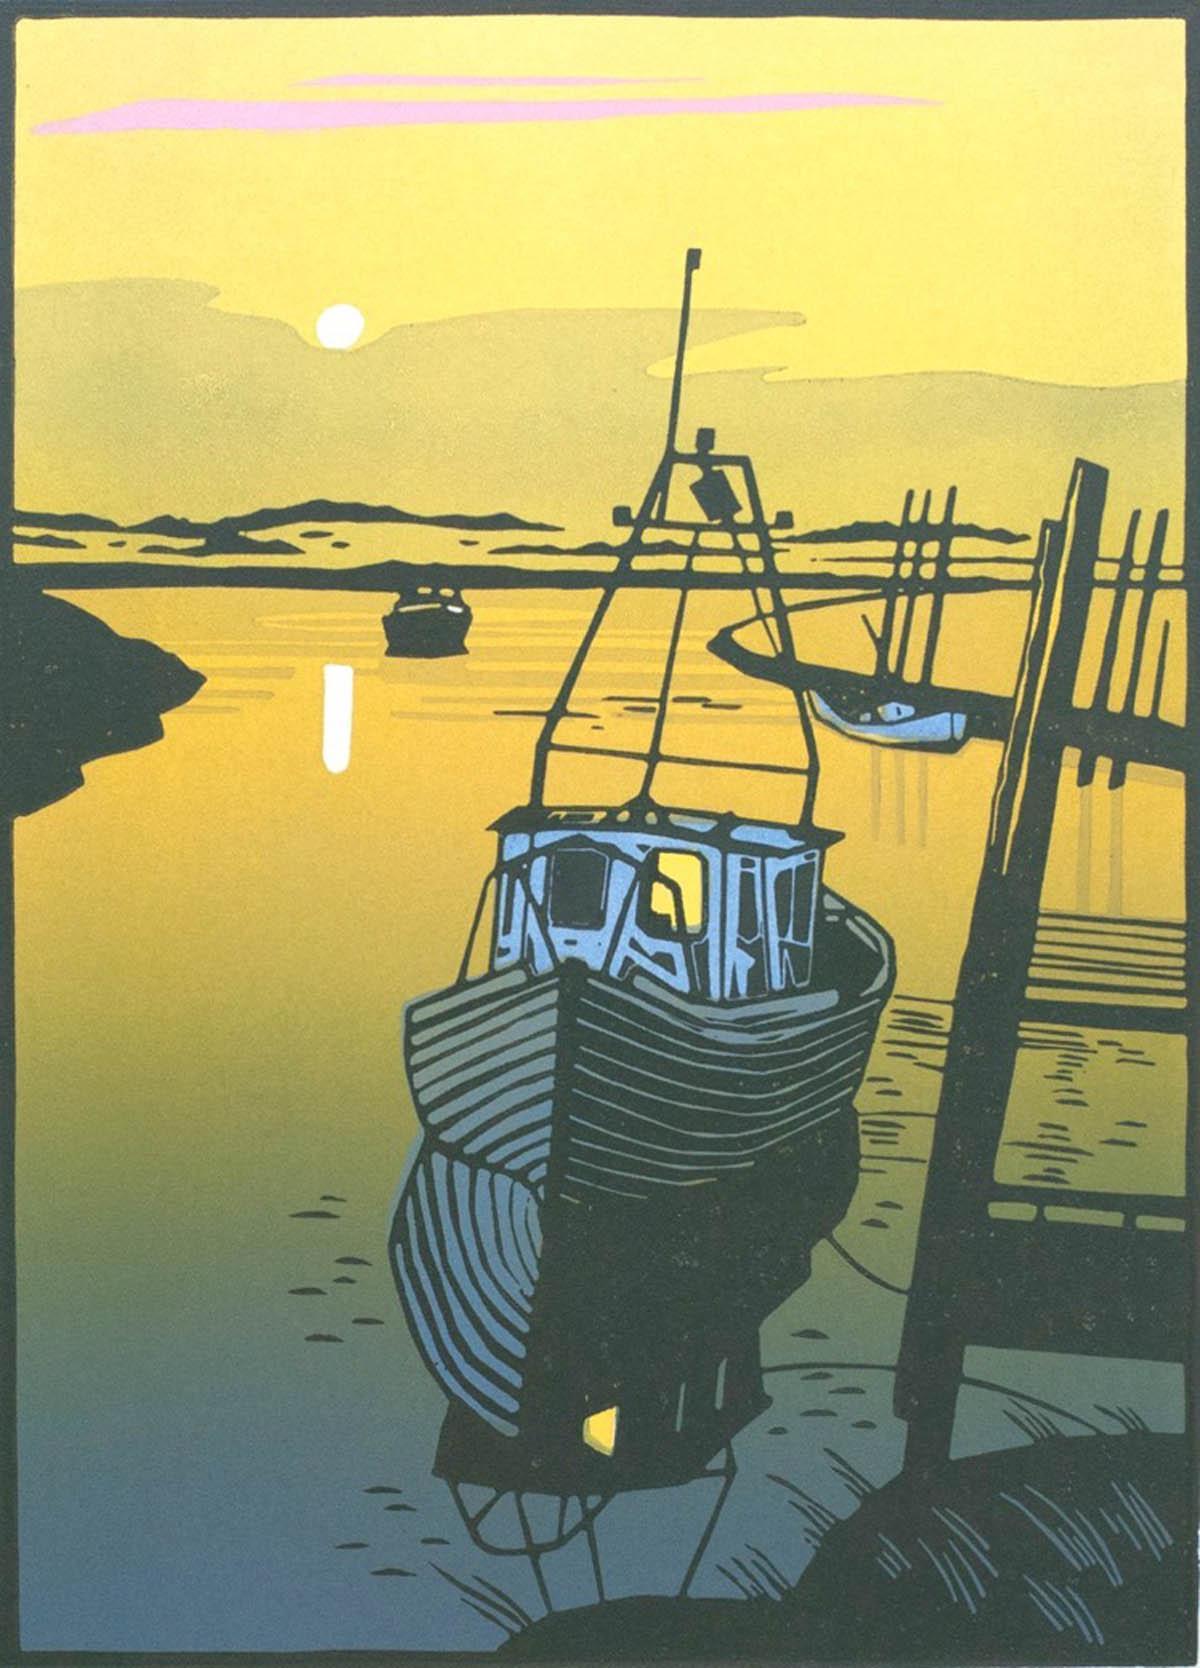 The Creek, Colin Moore, Limited Edition Linocut Print, Boating Art, Seascape